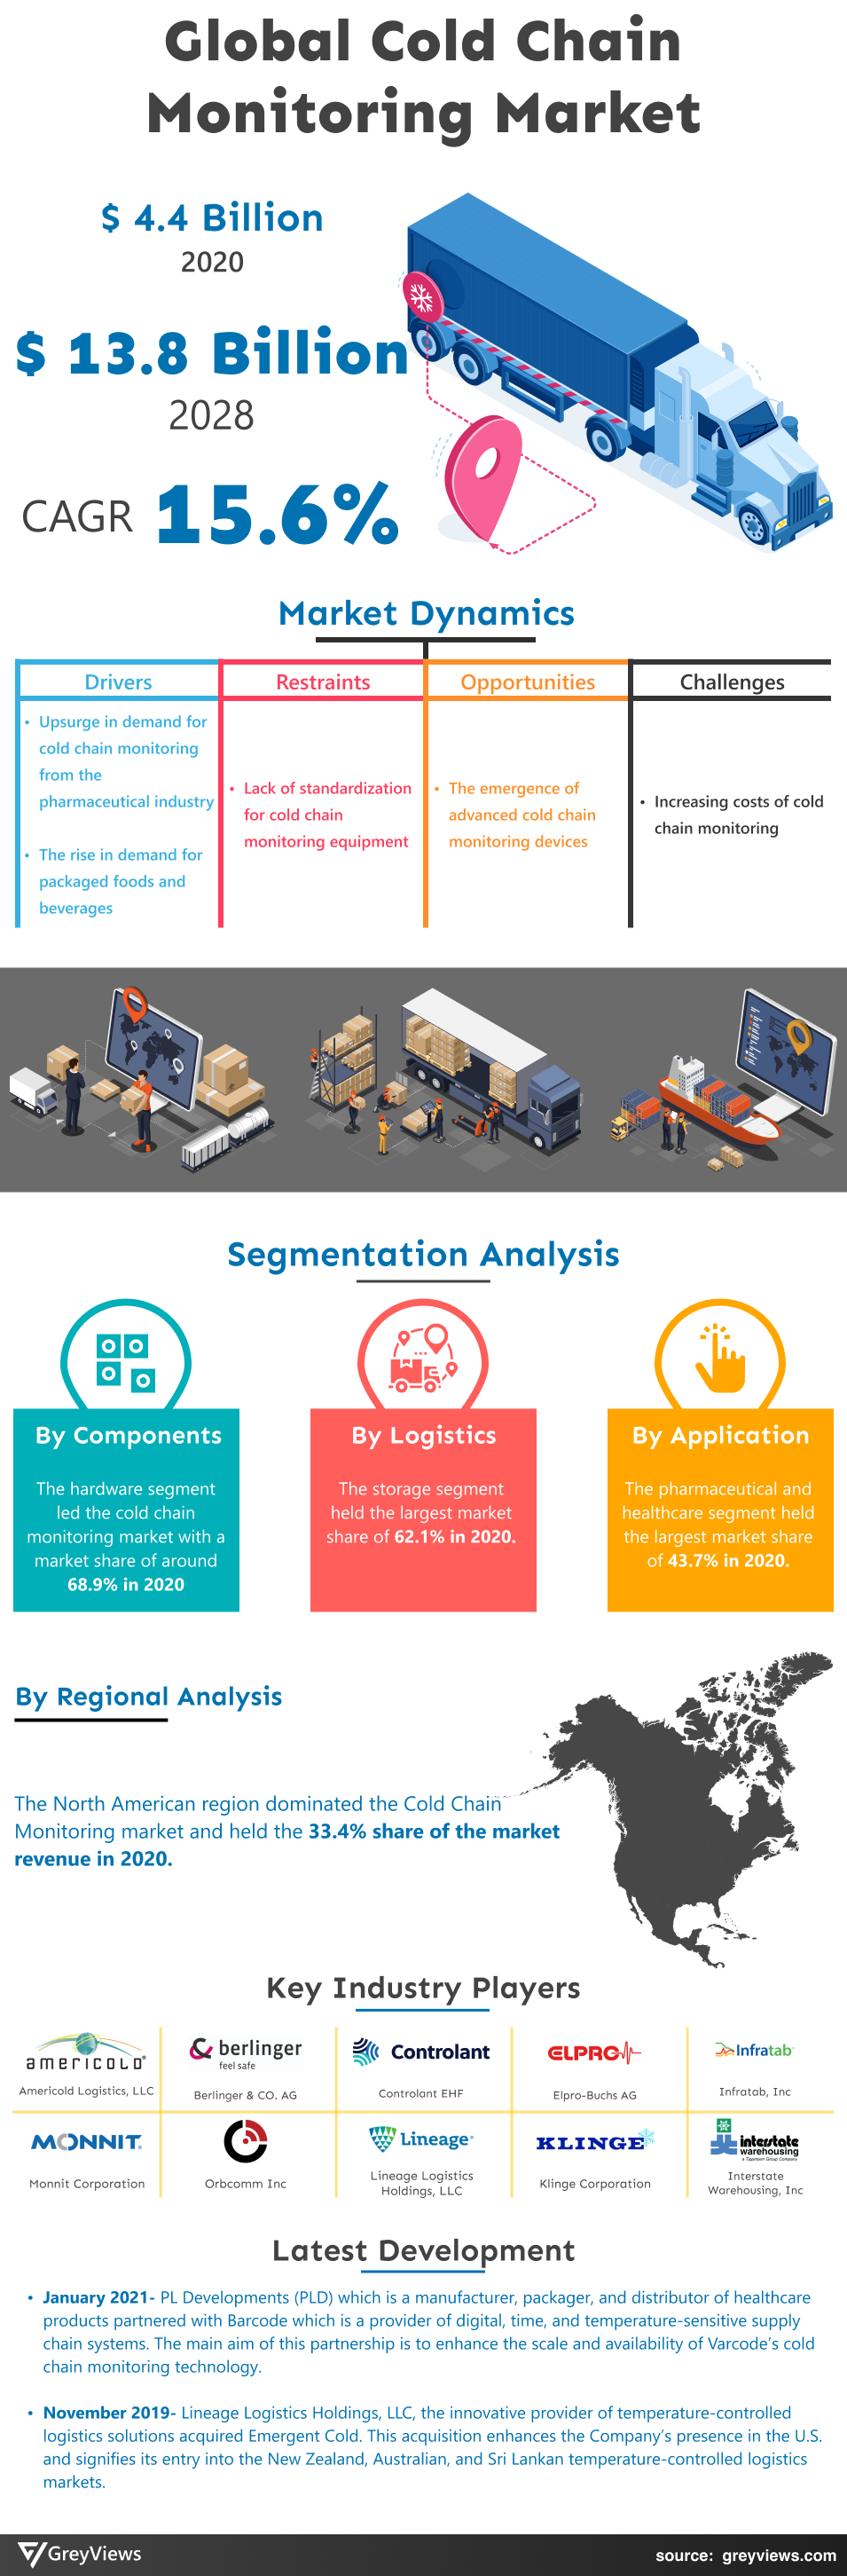 Greyviews Cold Chain Monitoring Market Infographic